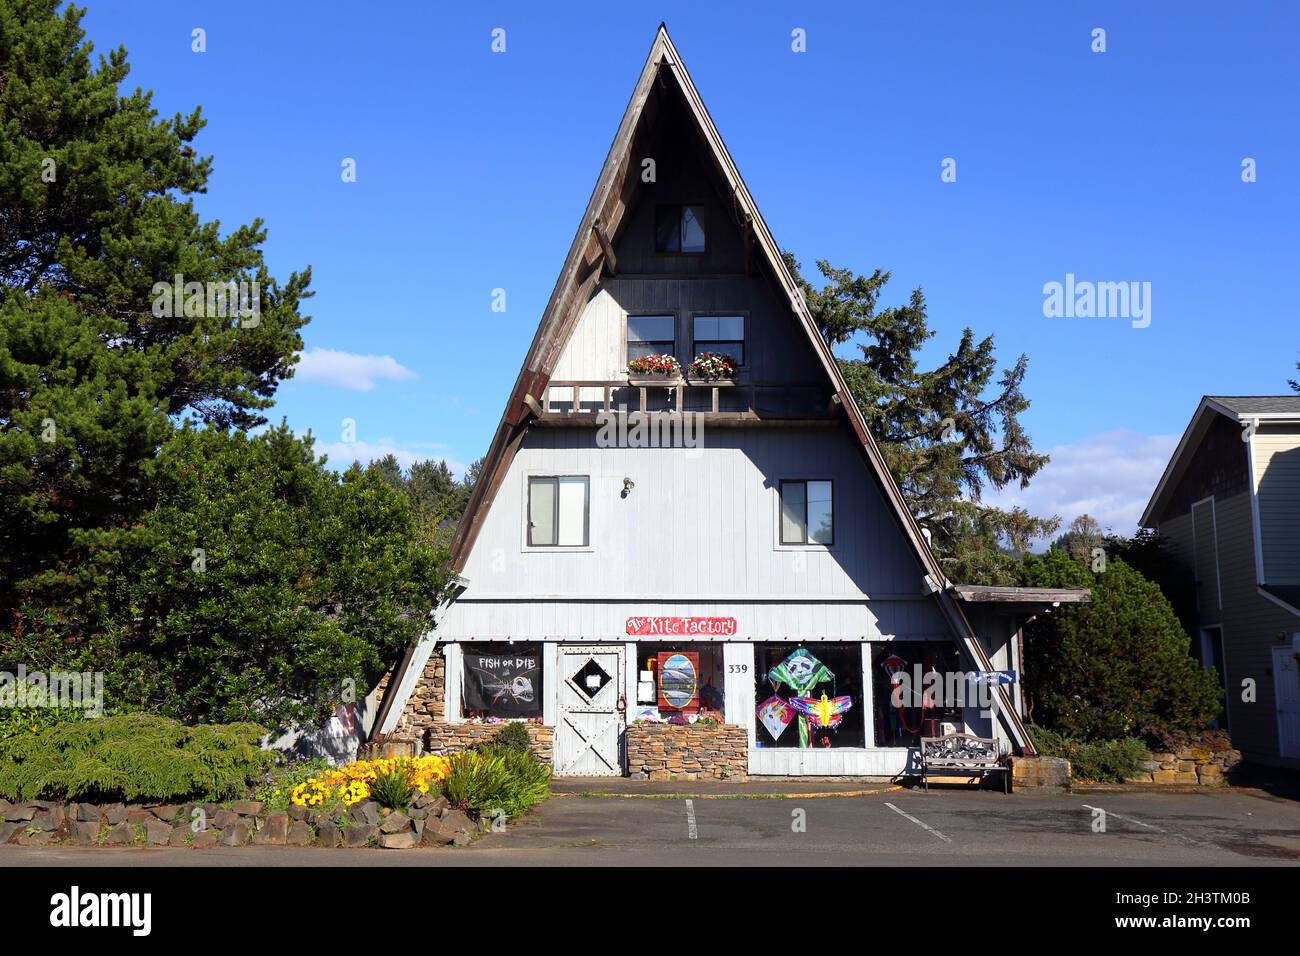 Pinky's Kite Factory, 339 Fir St, Cannon Beach, Oregon. exterior storefront of a kite shop in an A-Frame house shaped like an isosceles triangle. Stock Photo